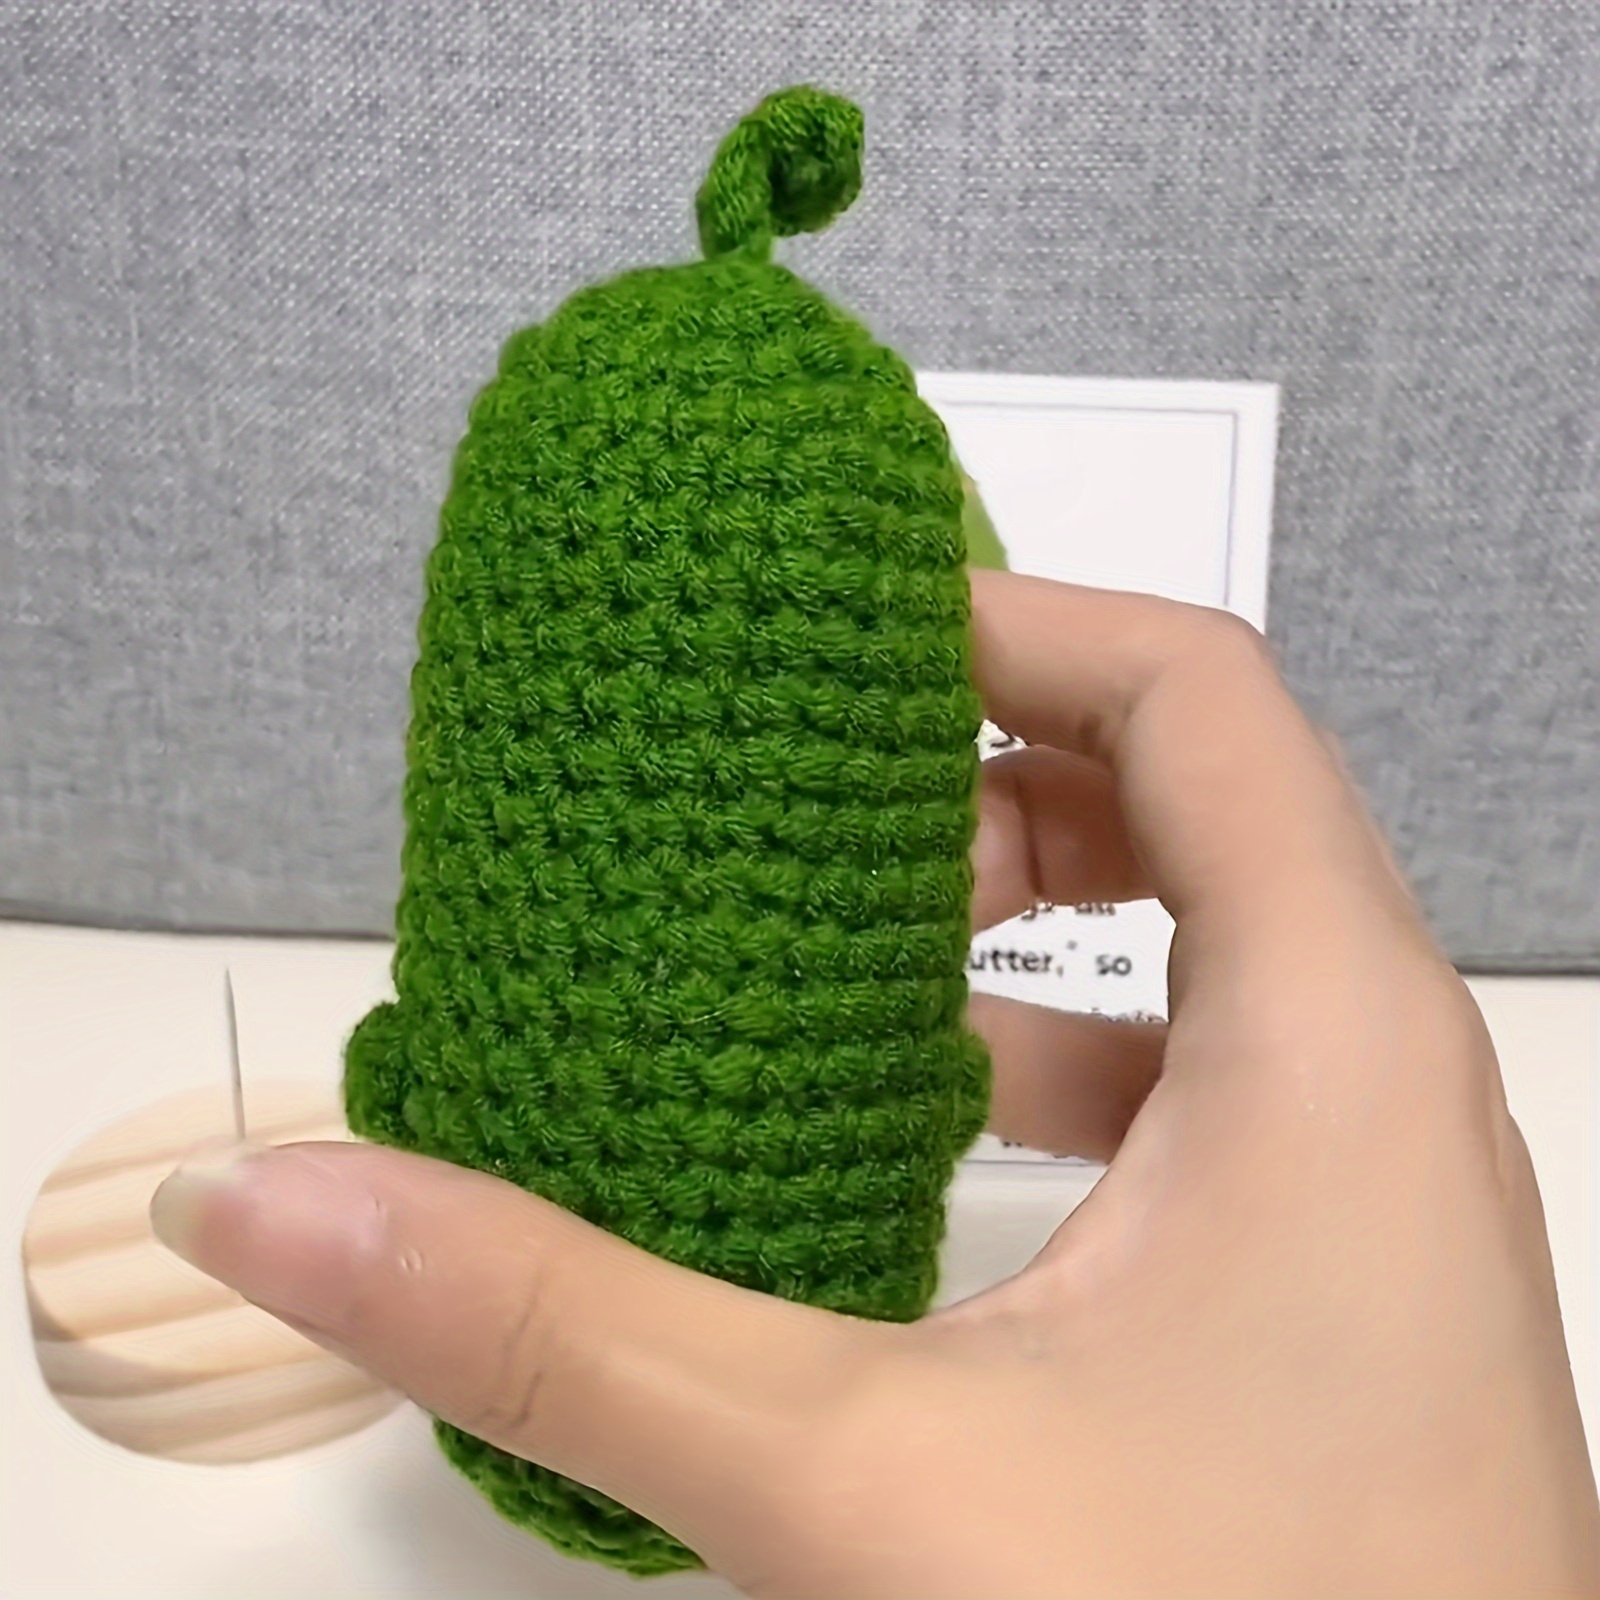 Handmade Emotional Support Pickled Cucumber Gifts, Crochet